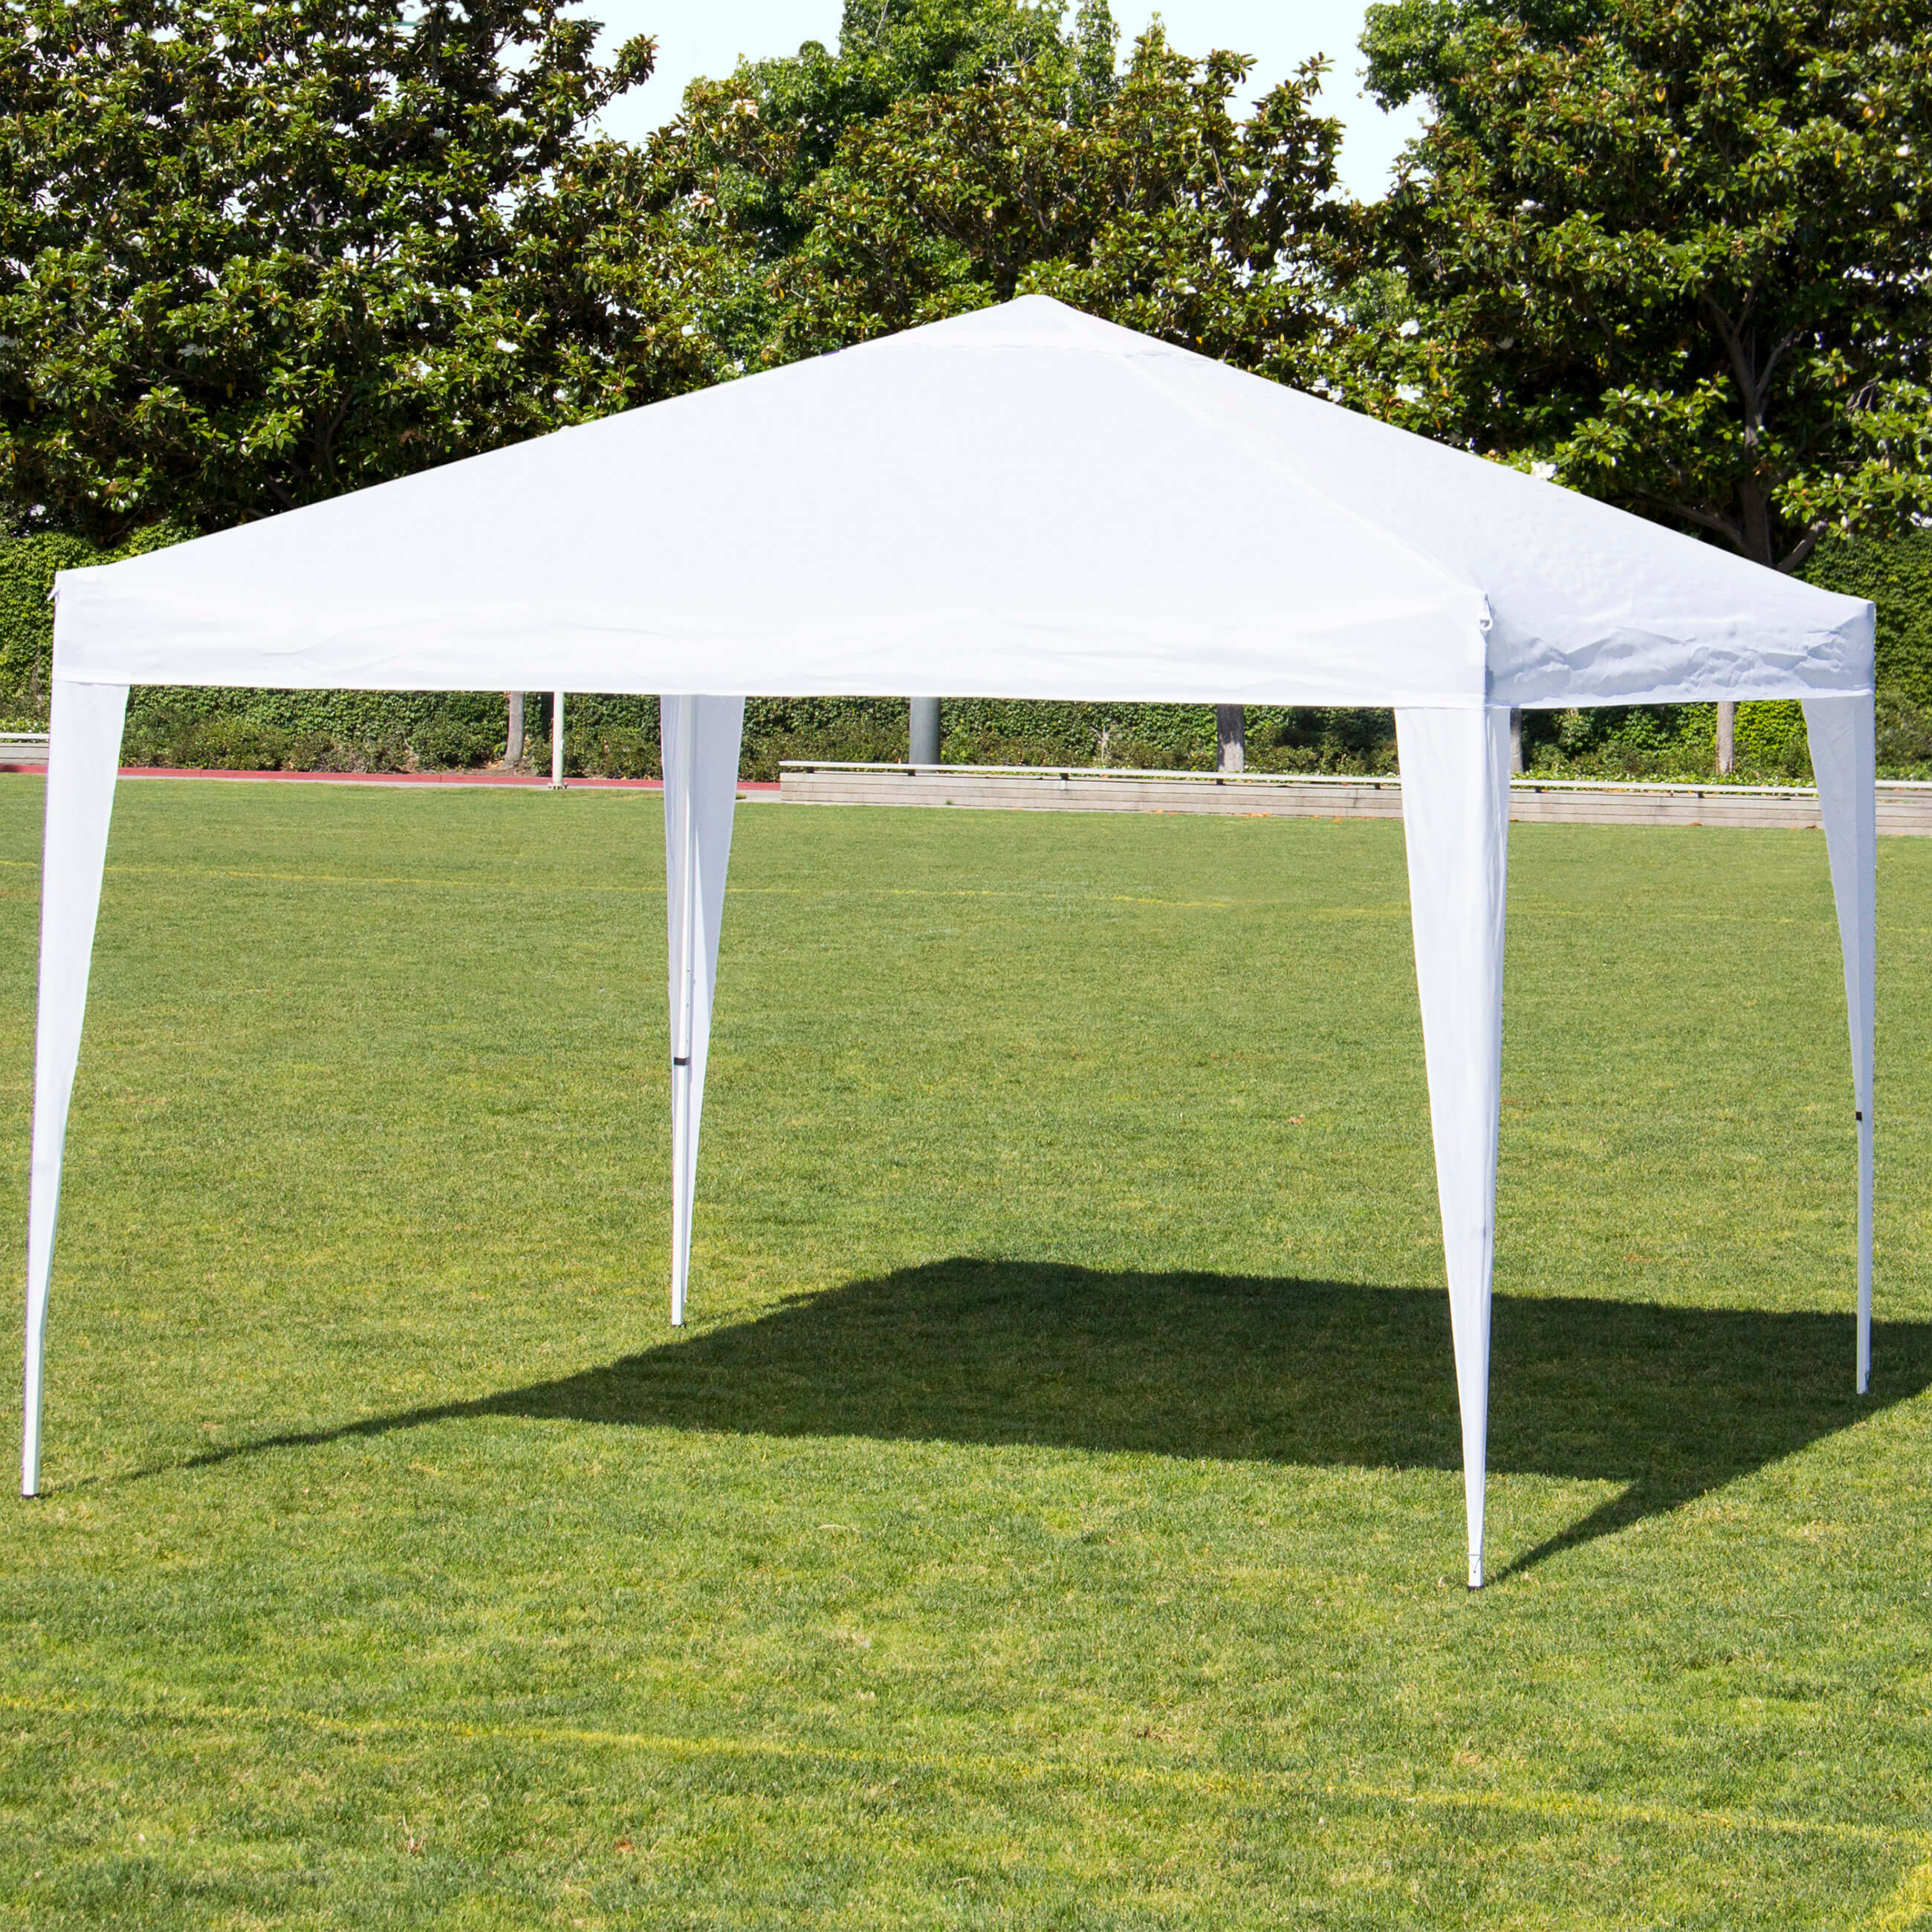 Tent canopy Rental Chicago | Party Tent Rental Chicago, Wedding Tent ...